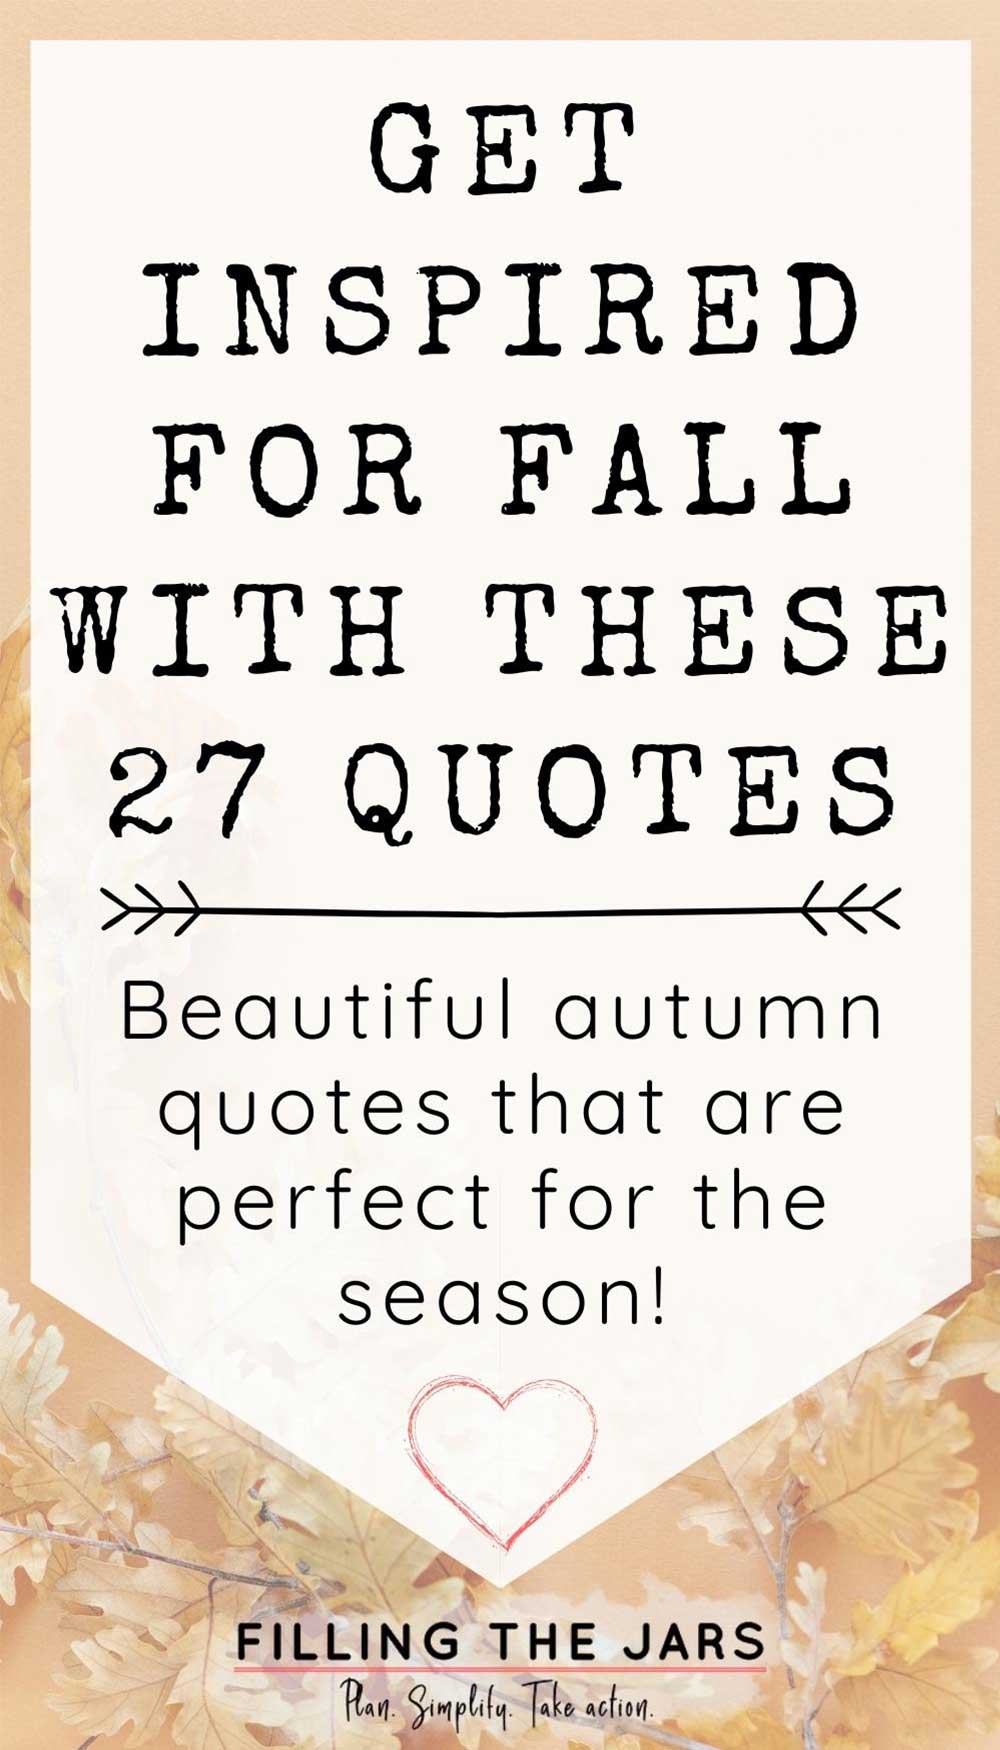 Text get inspired for fall with these 27 quotes on white background over faded autumn leaves.